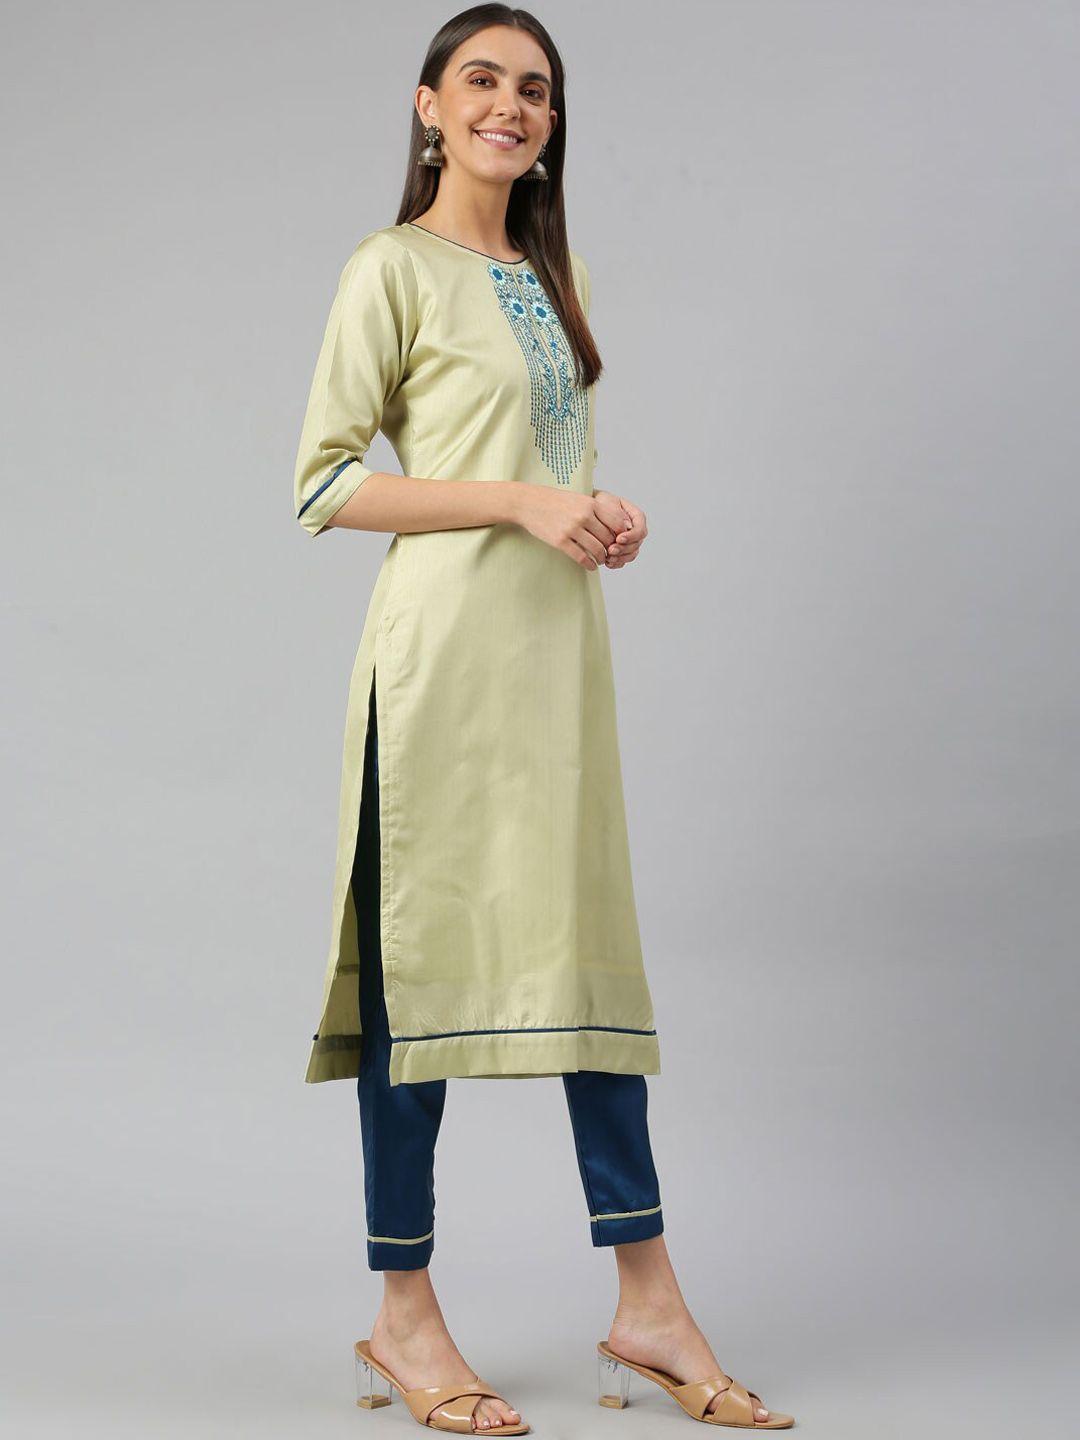 lilots women gold-toned embroidered kurta with trousers & dupatta